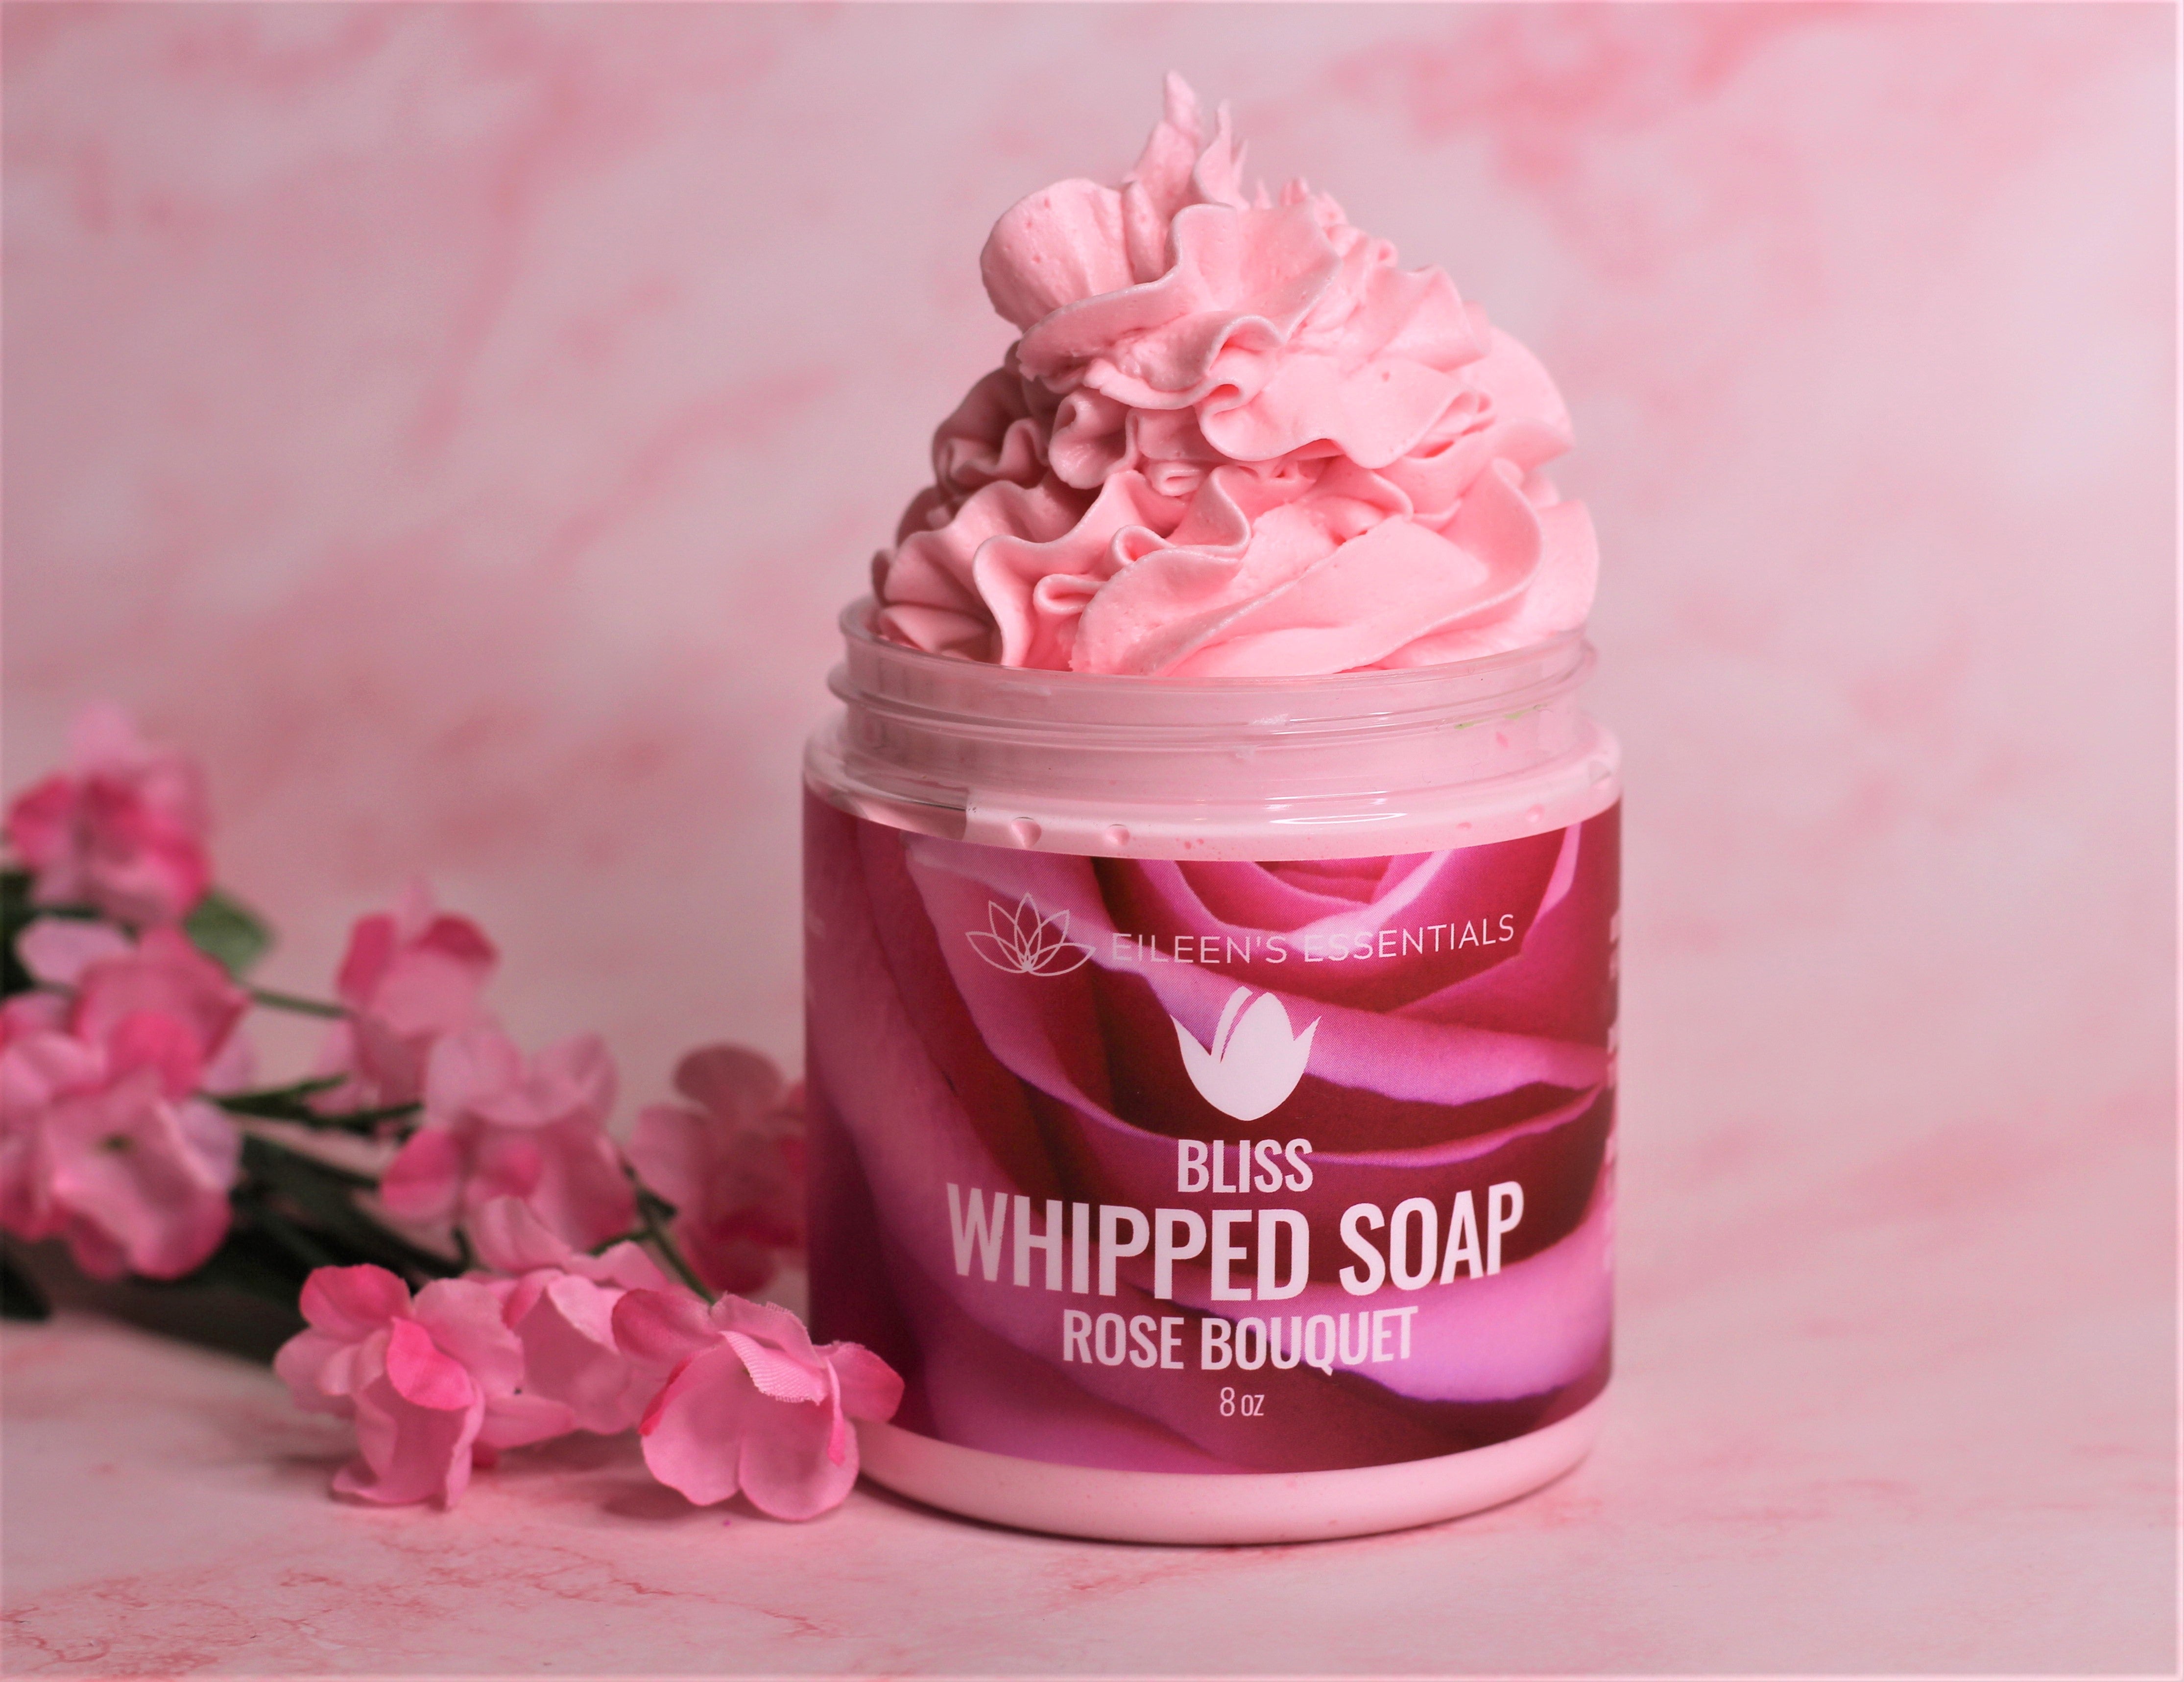 Whipped Soap; BLISS (Rose Bouquet)